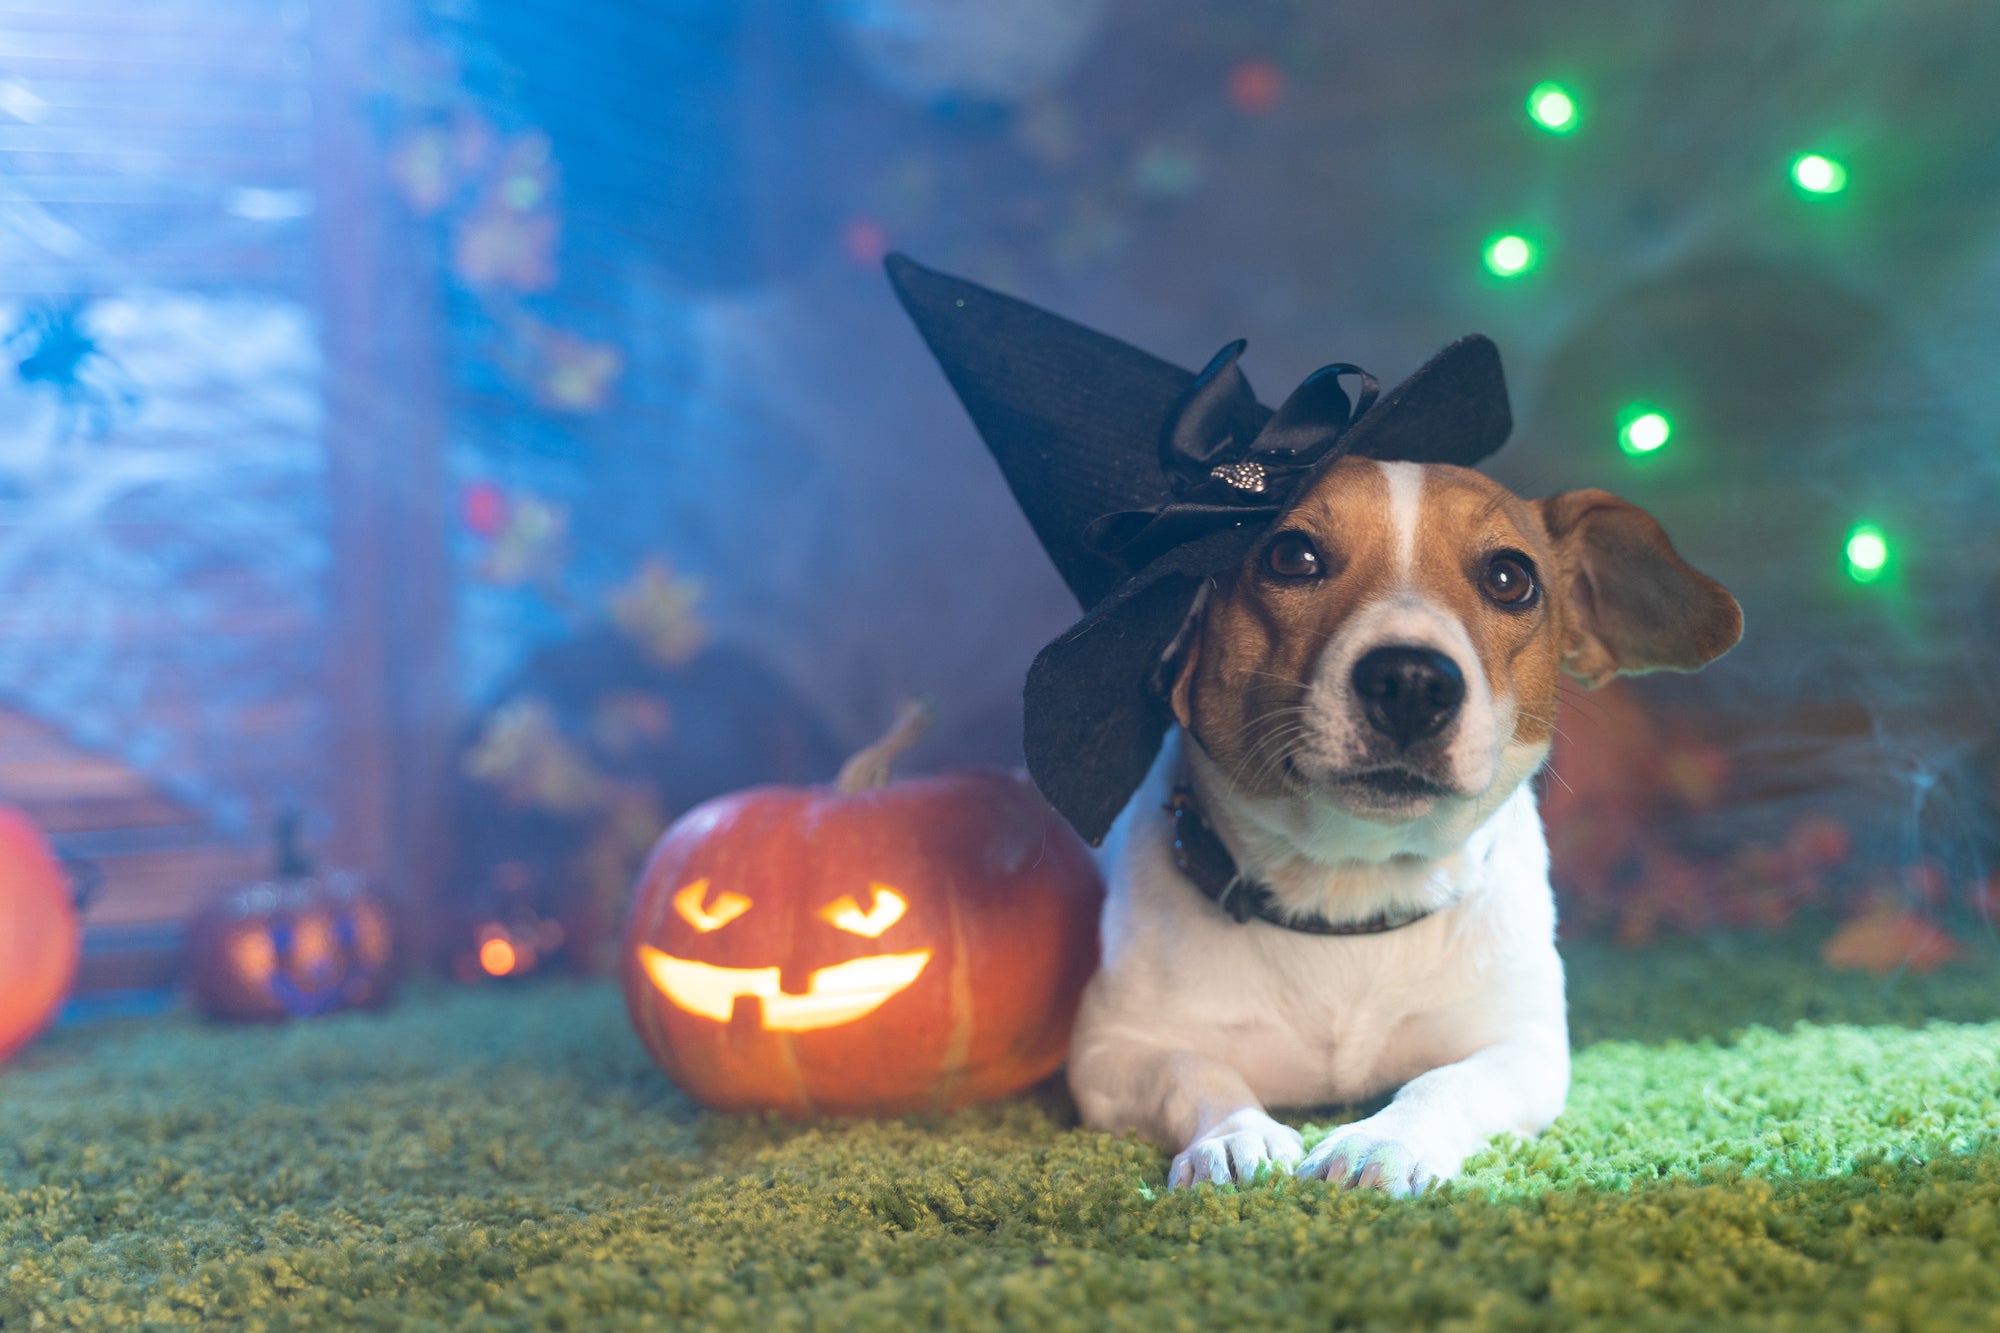 terrier in witch hat next to carved pumpkin in grass